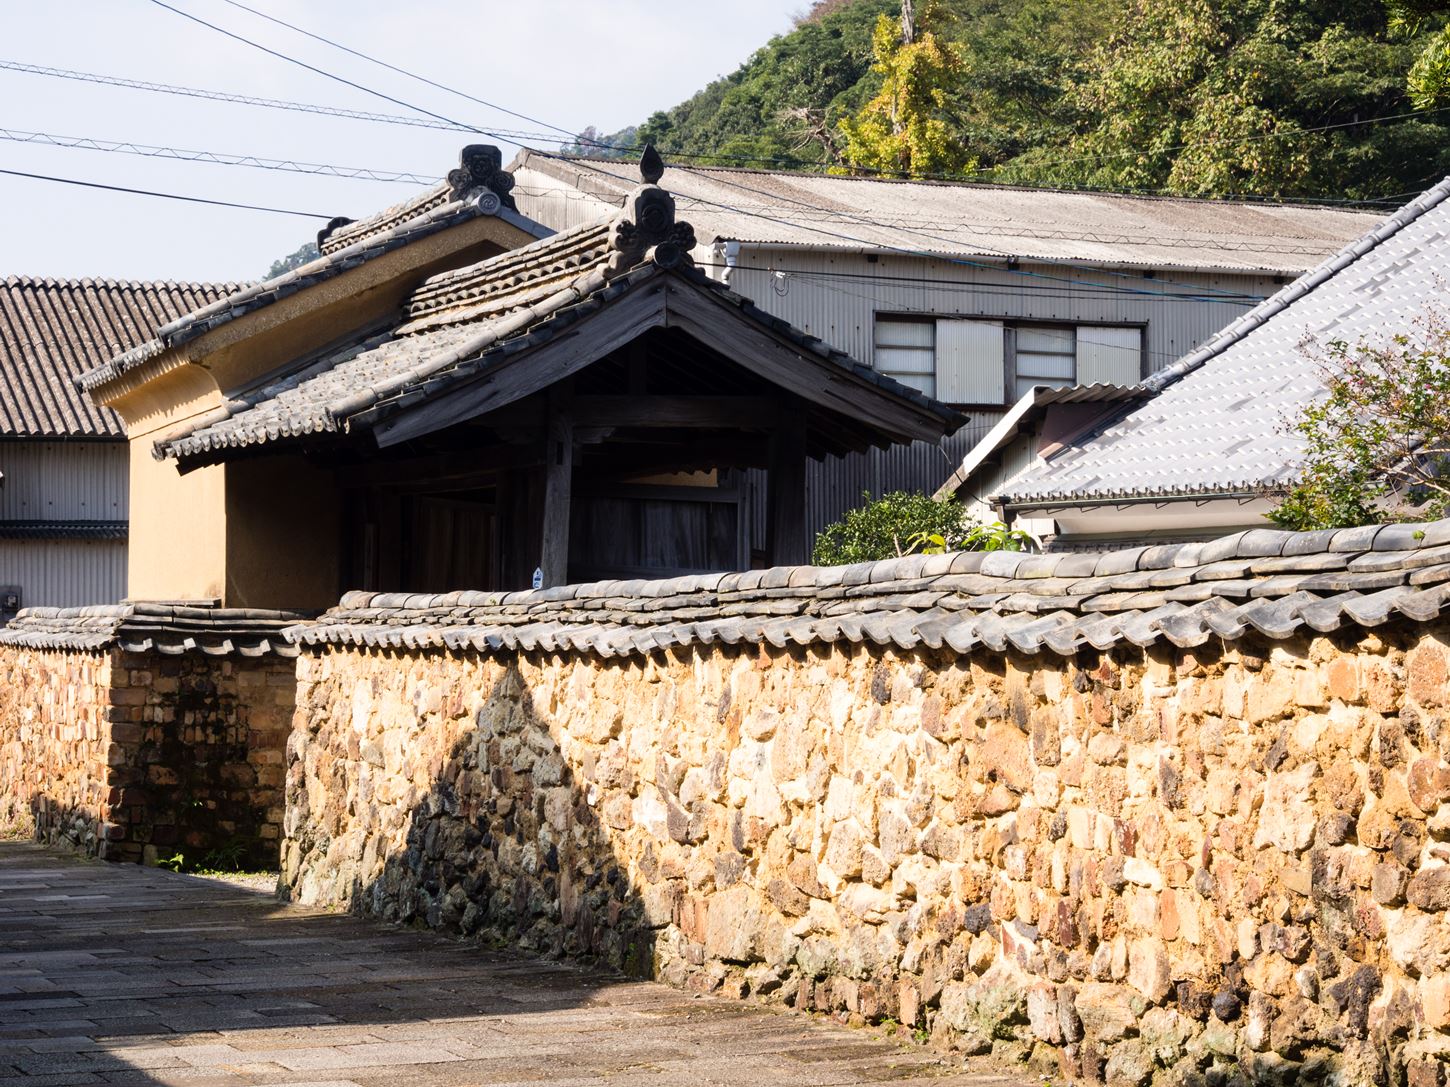 Traditional Japanese house of pottery maker in the town of Arita, birthplace of Japanese porcelain - Saga prefecture, Japan = Shutterstock